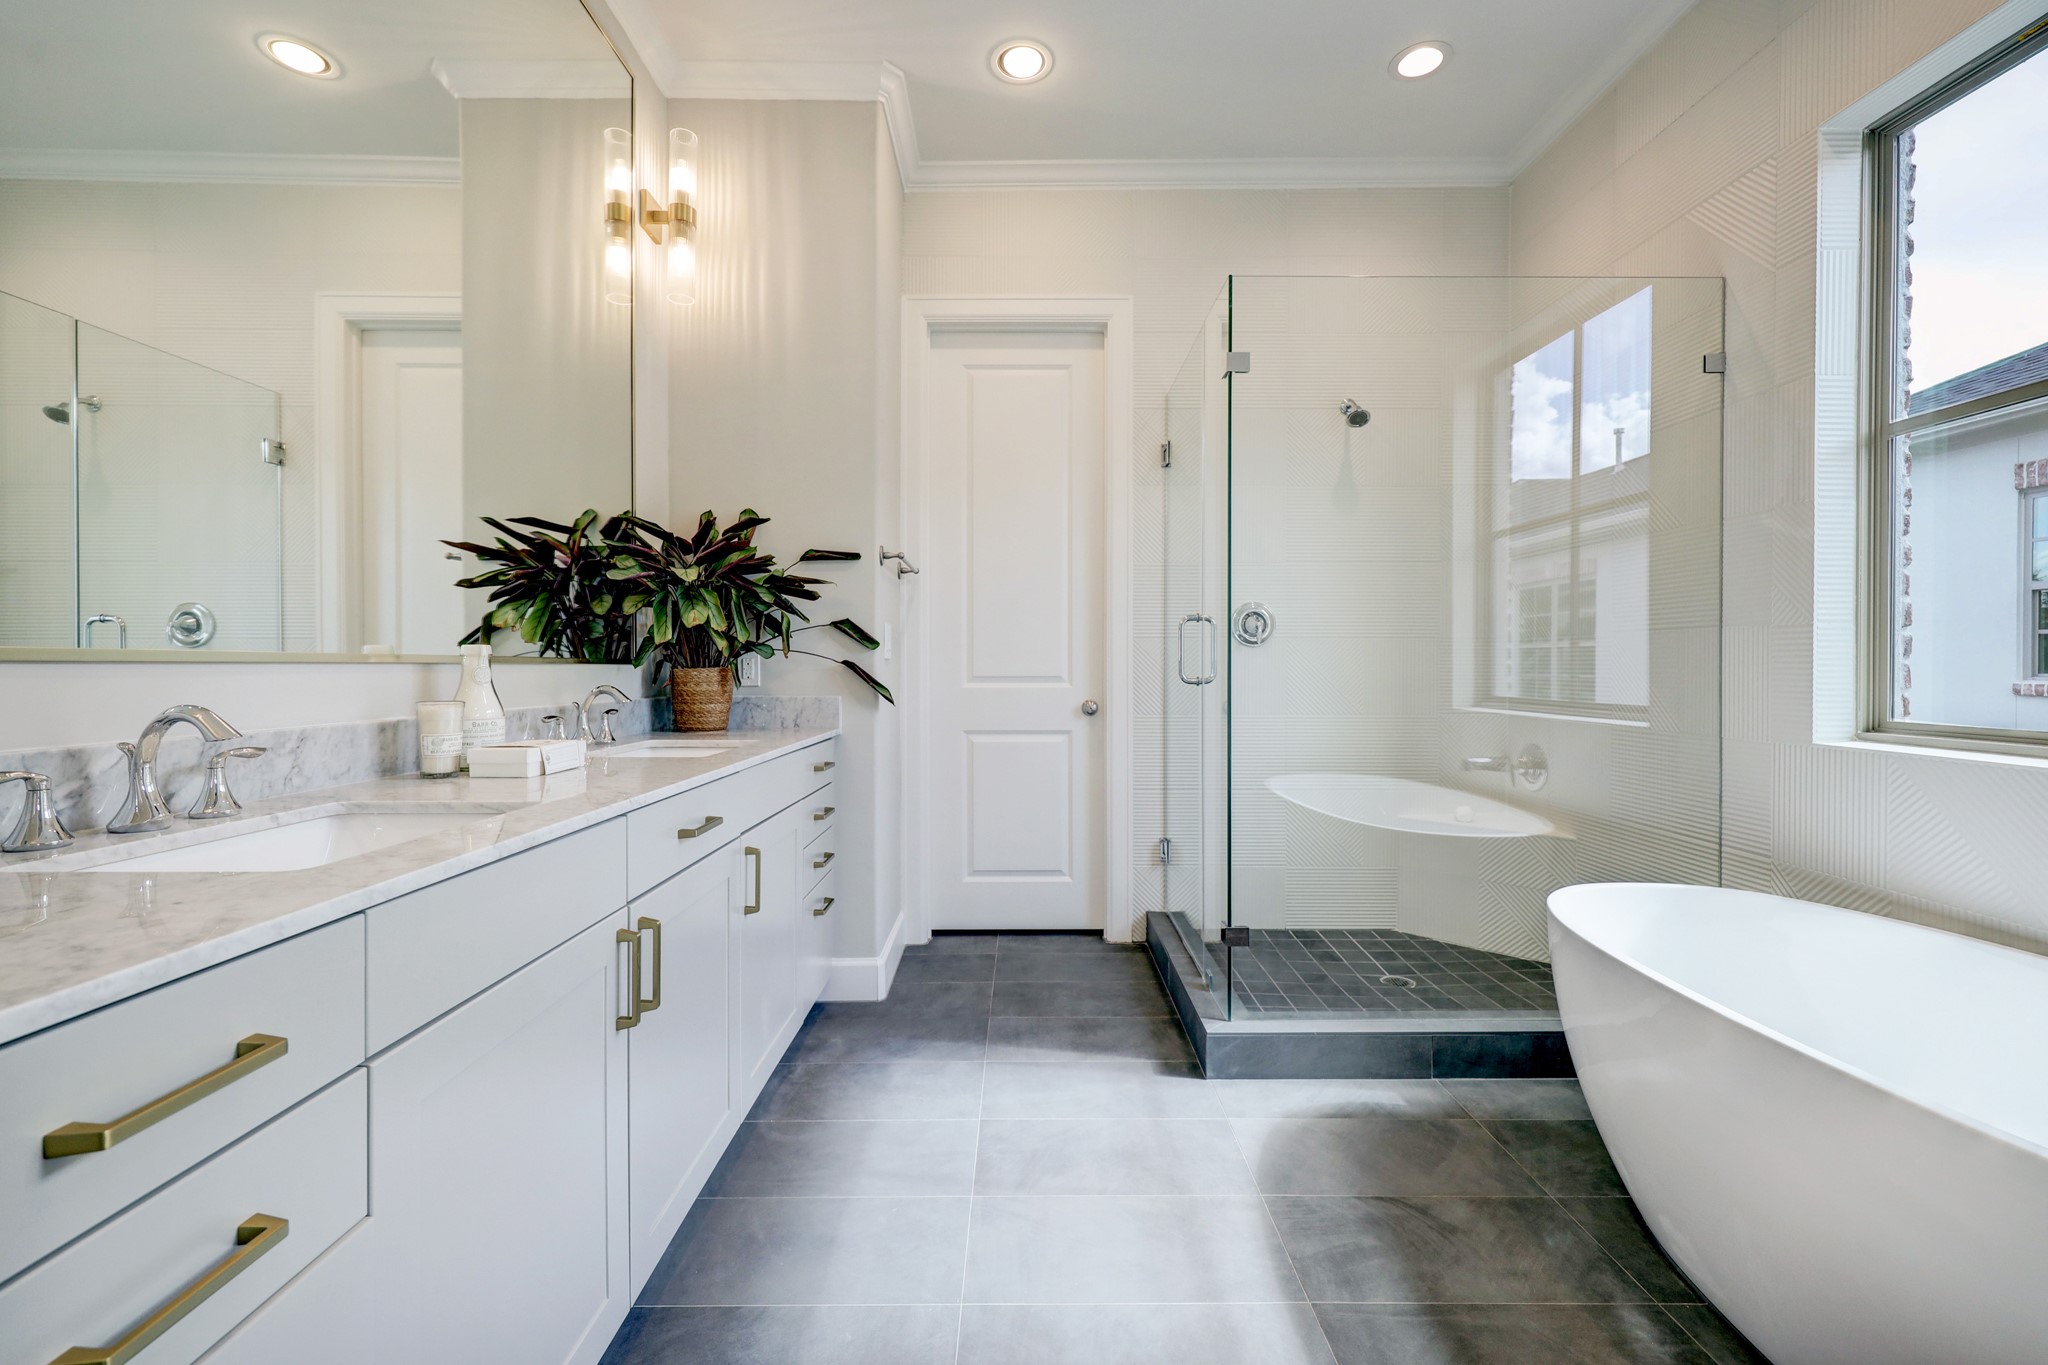 Relaxing Primary Bath with double
sinks, separate water closet, oversized
walk-in shower and soaking tub.